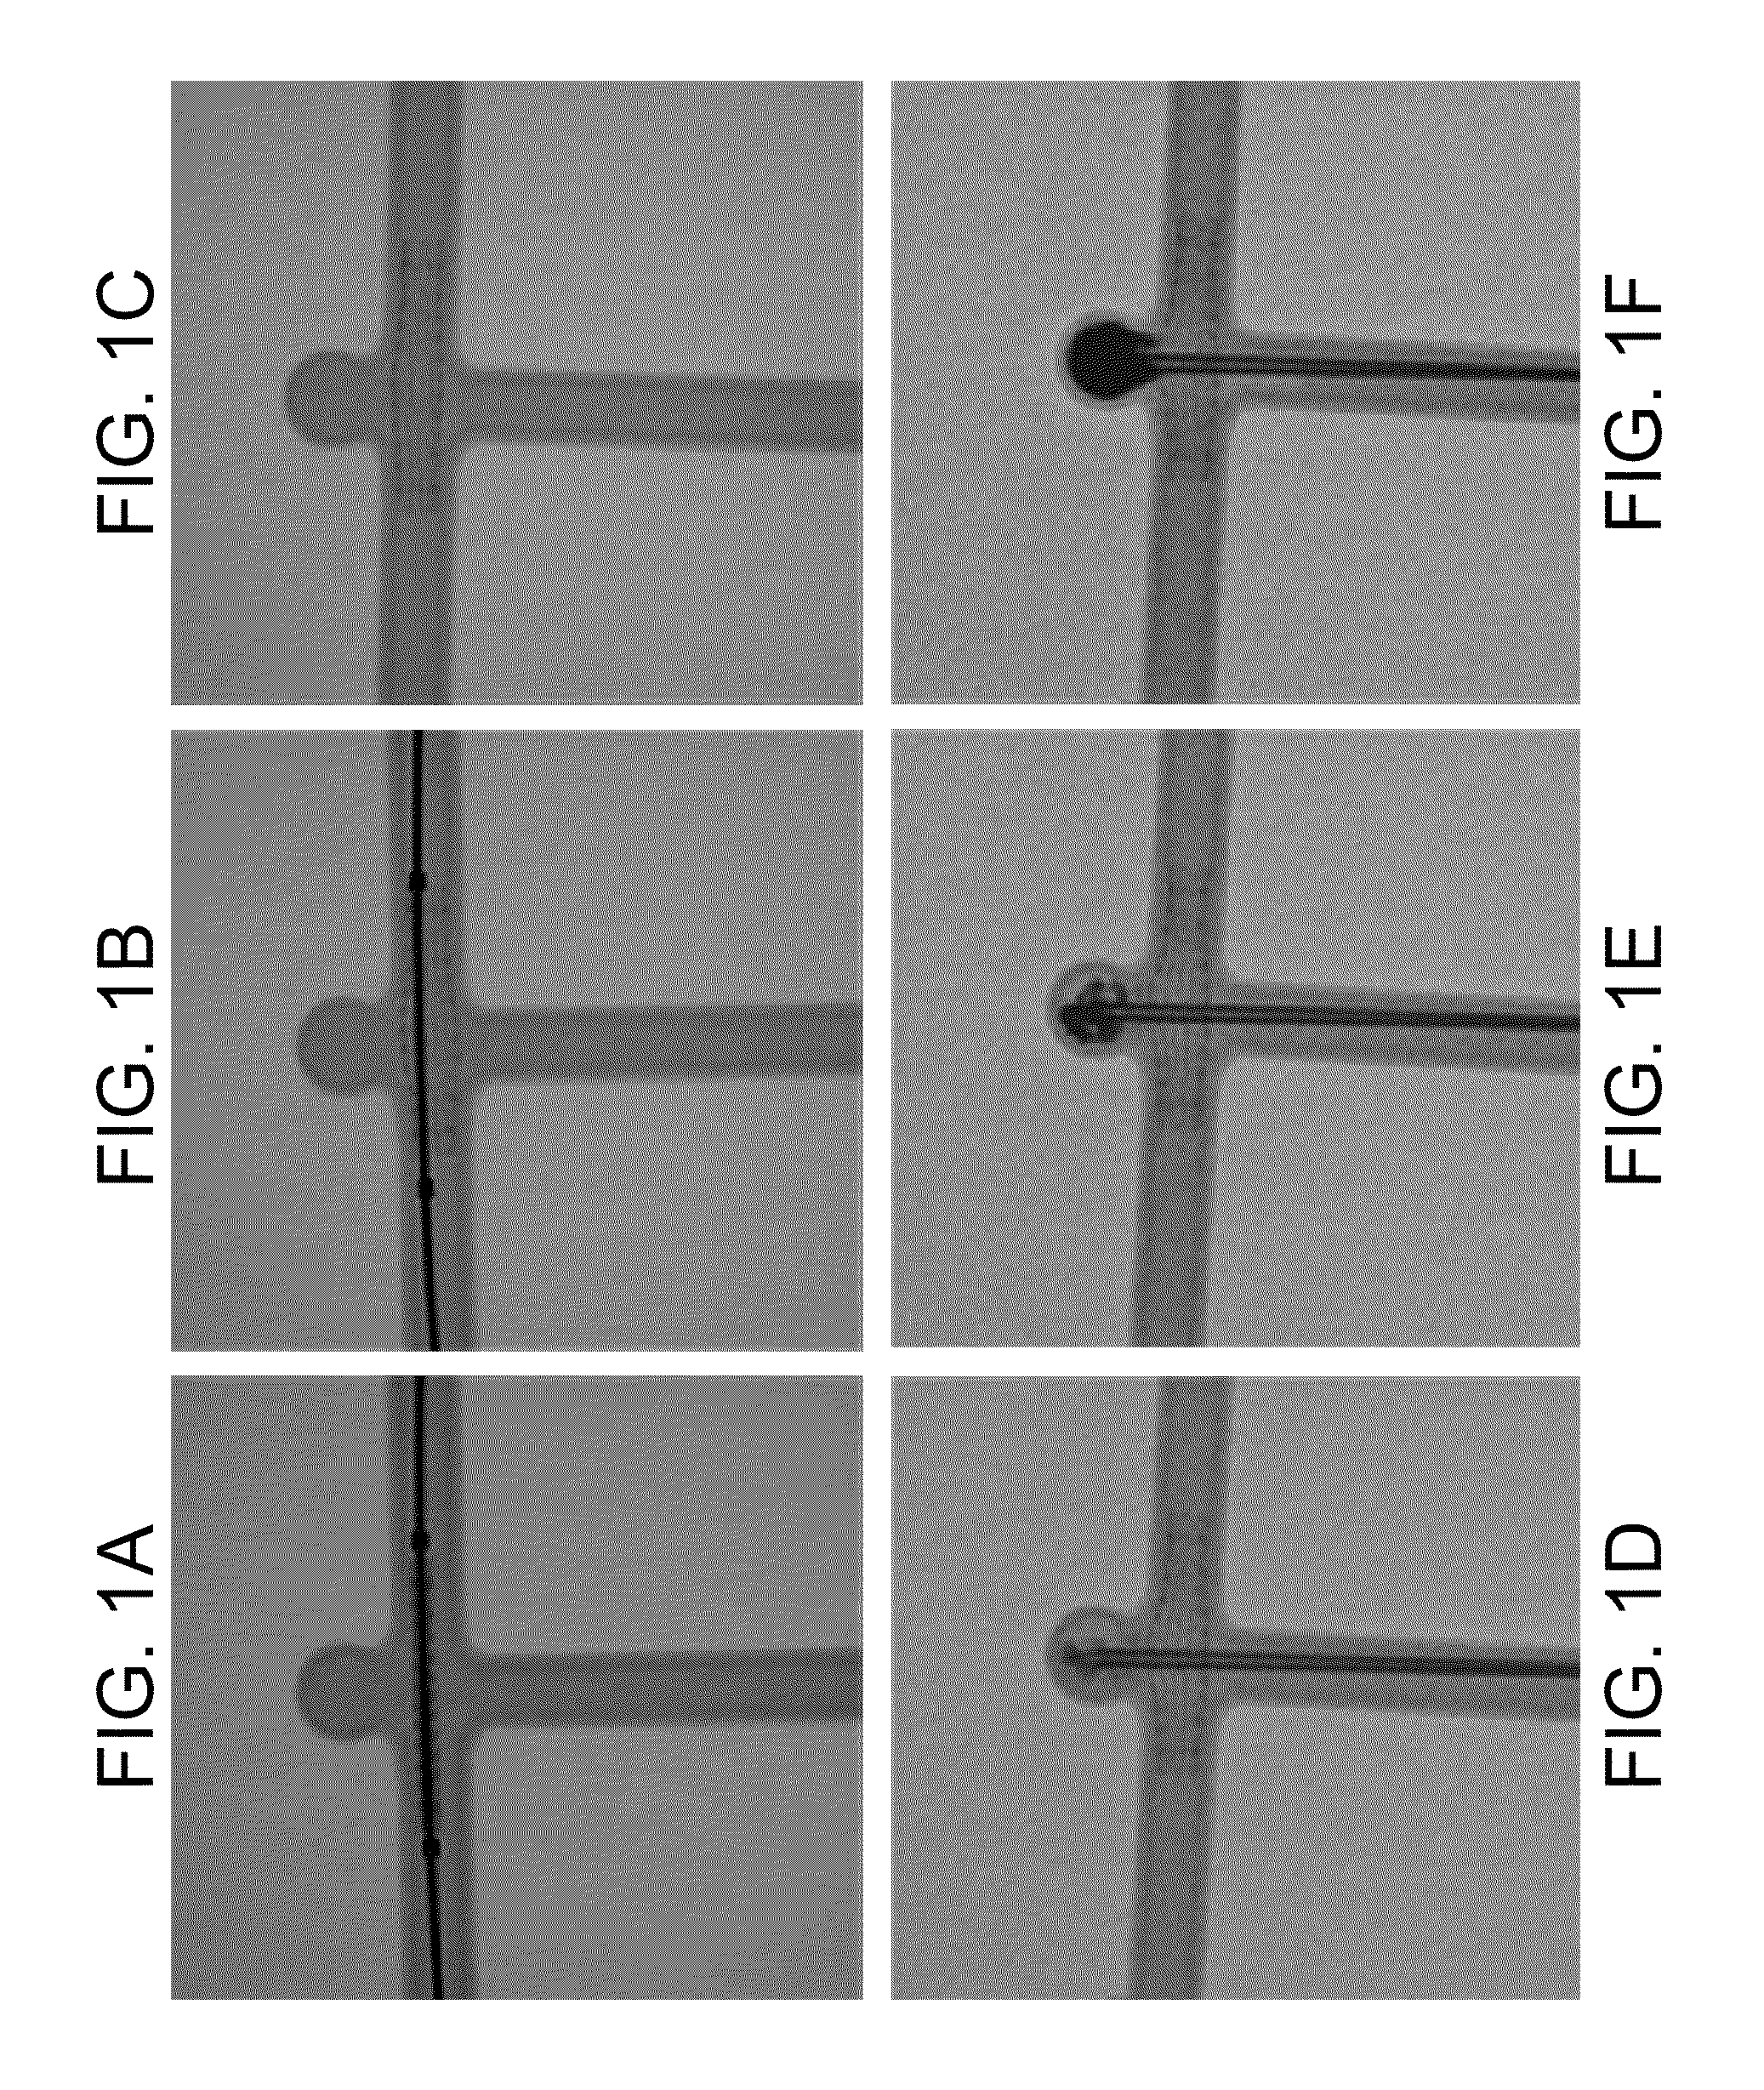 Alginate and alginate lyase compositions and methods of use